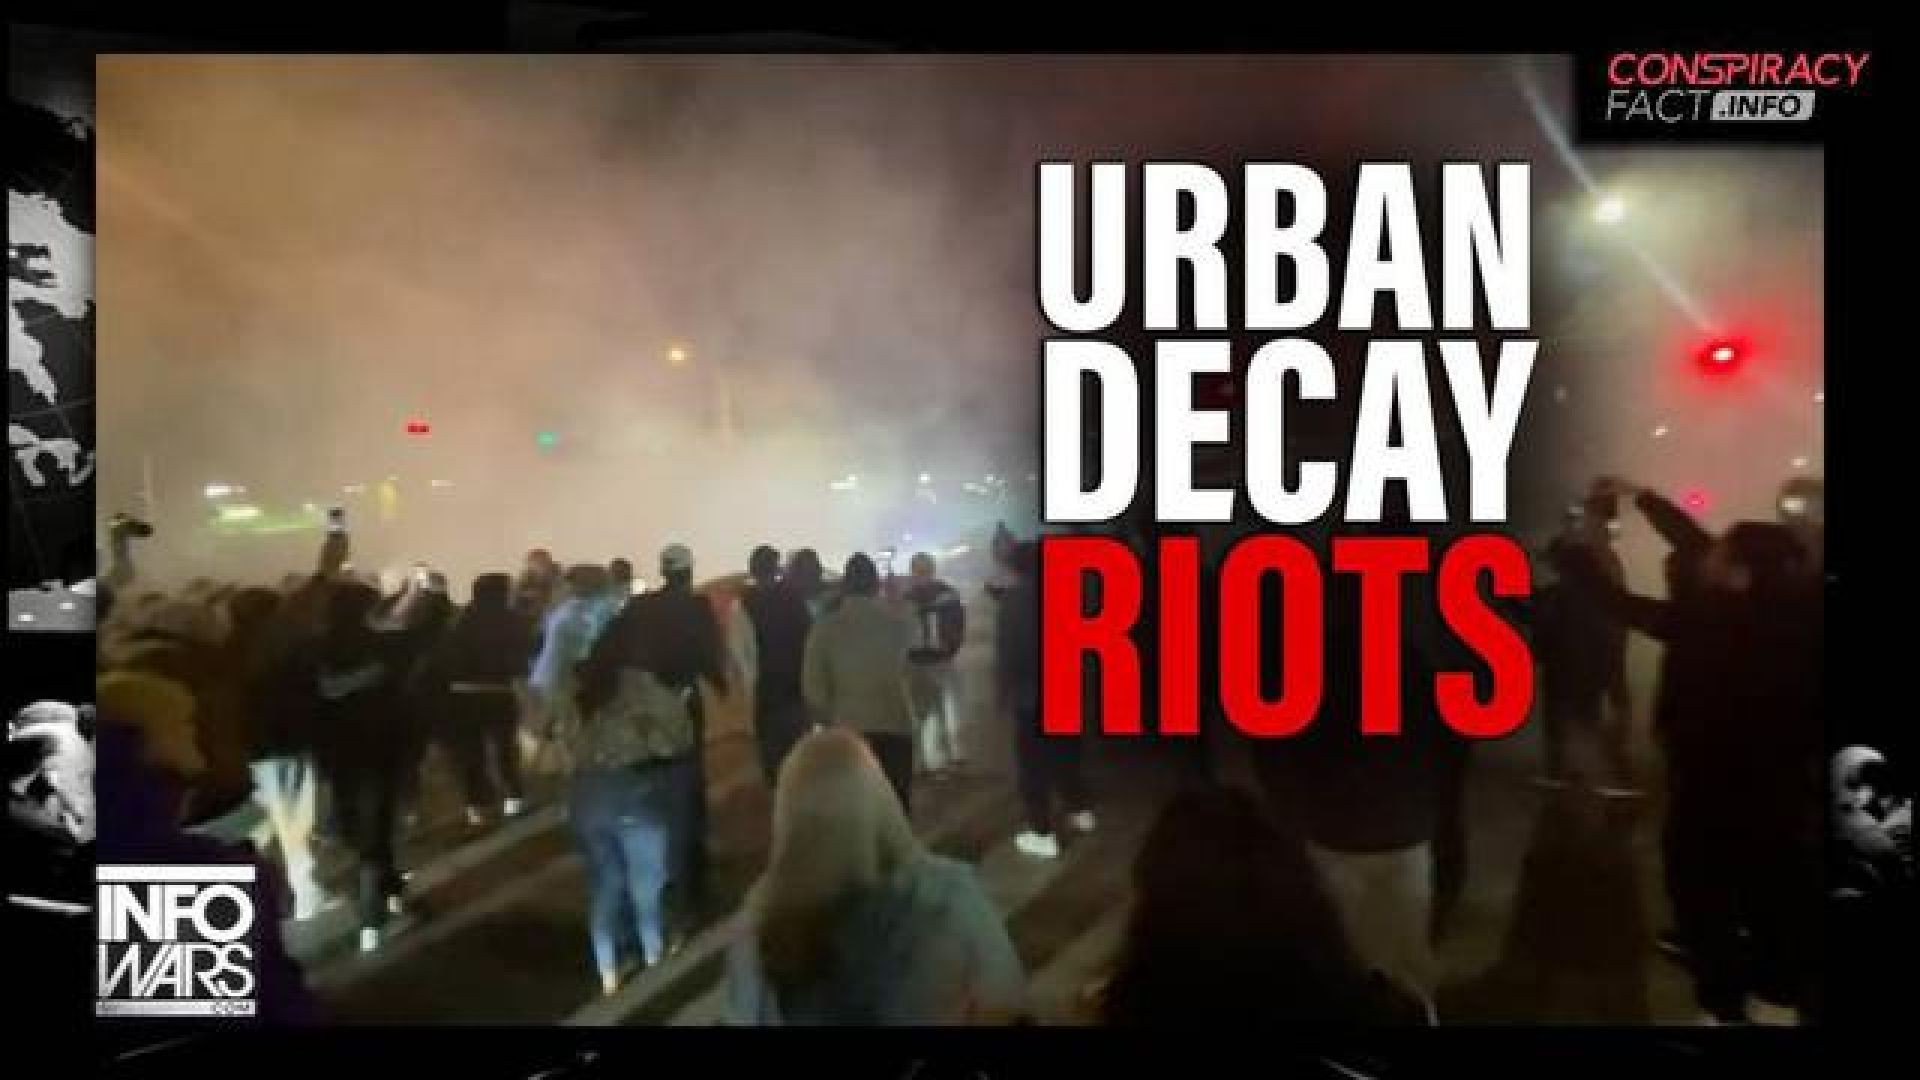 RIOTS IN THE STREETS OF AUSTIN AS LEFTIST CONTROL SPREADS URBAN DECAY